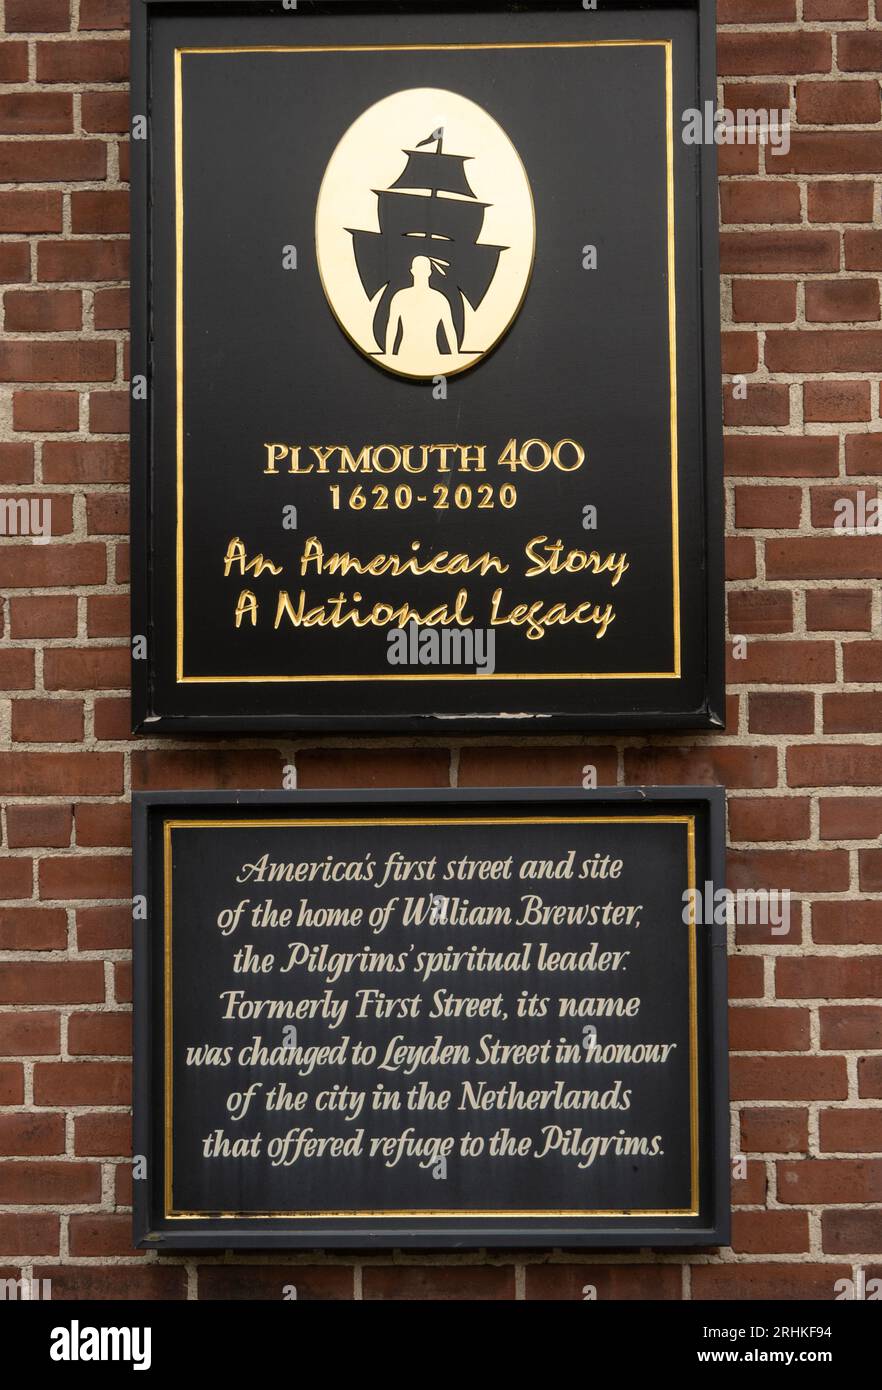 Americas first street and site of the home of William Brewster the Pilgrims spiritual leader in Plymouth MA Stock Photo